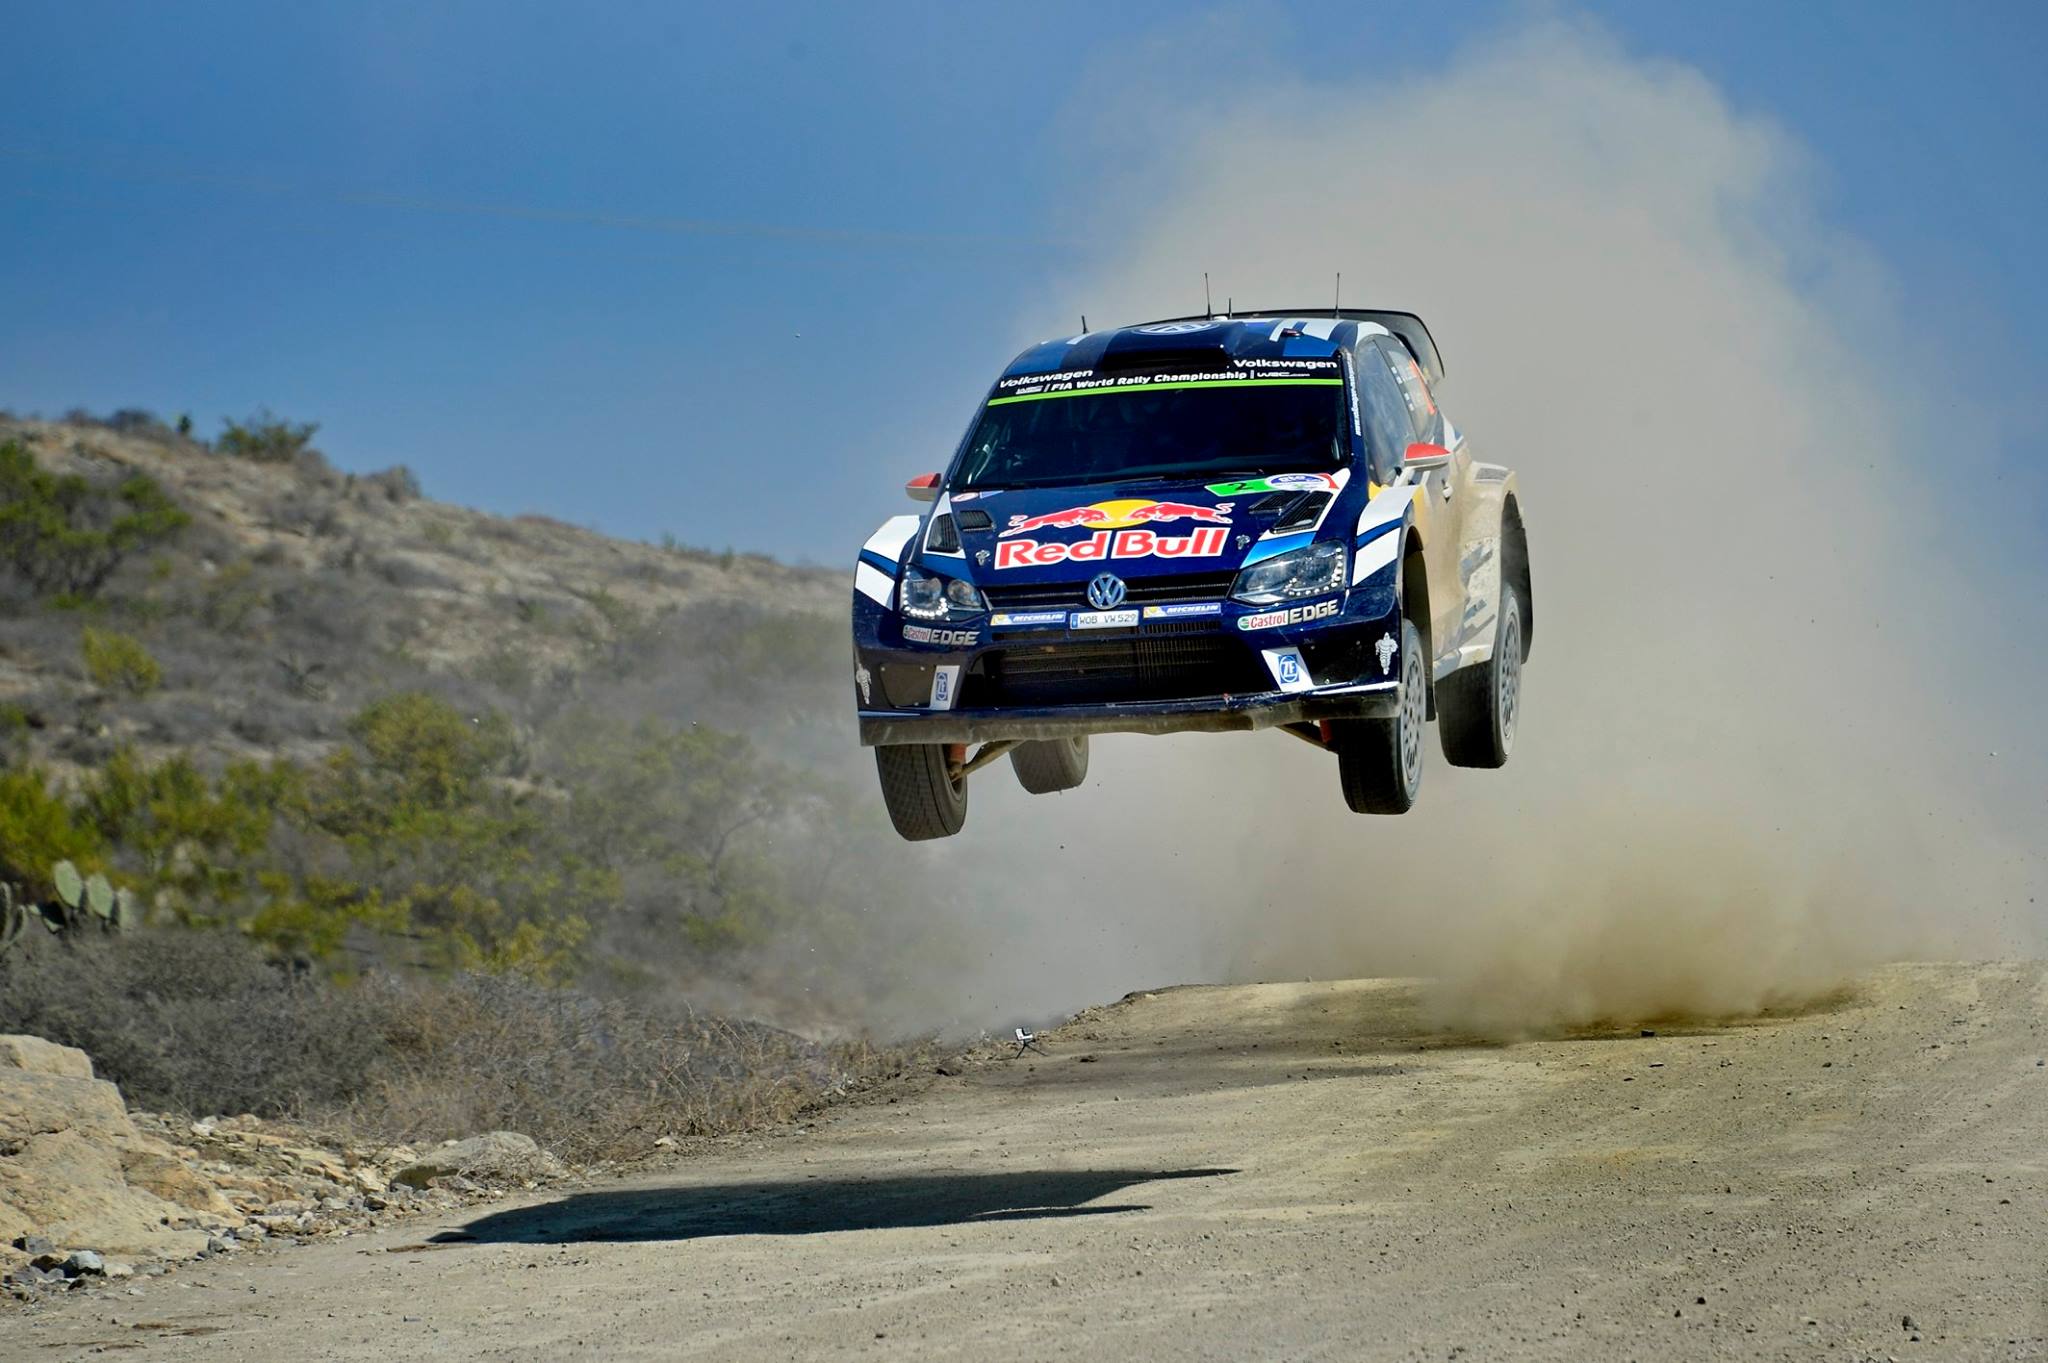 Latvala has jumped to the lead in Mexico